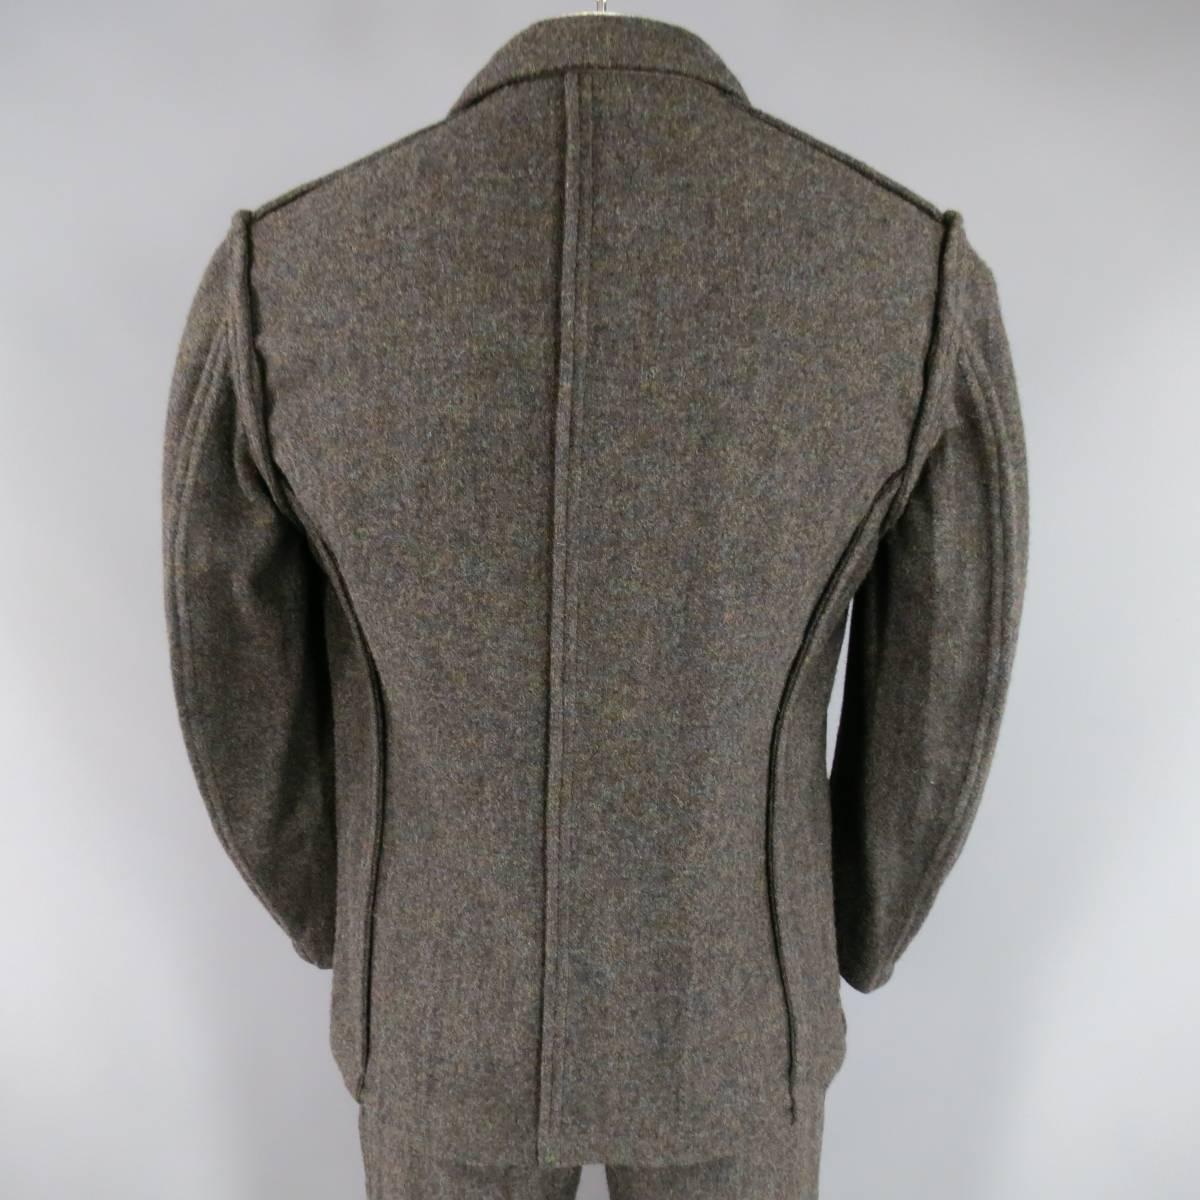 This rare COMME des GARCONS Fall 1998 suit comes in a very unique multi-color blended wool and includes a three button sport coat with a wide notch lapel, thick, reverse seam piping details, and patch pockets, with matching pleated, cuffed trousers.